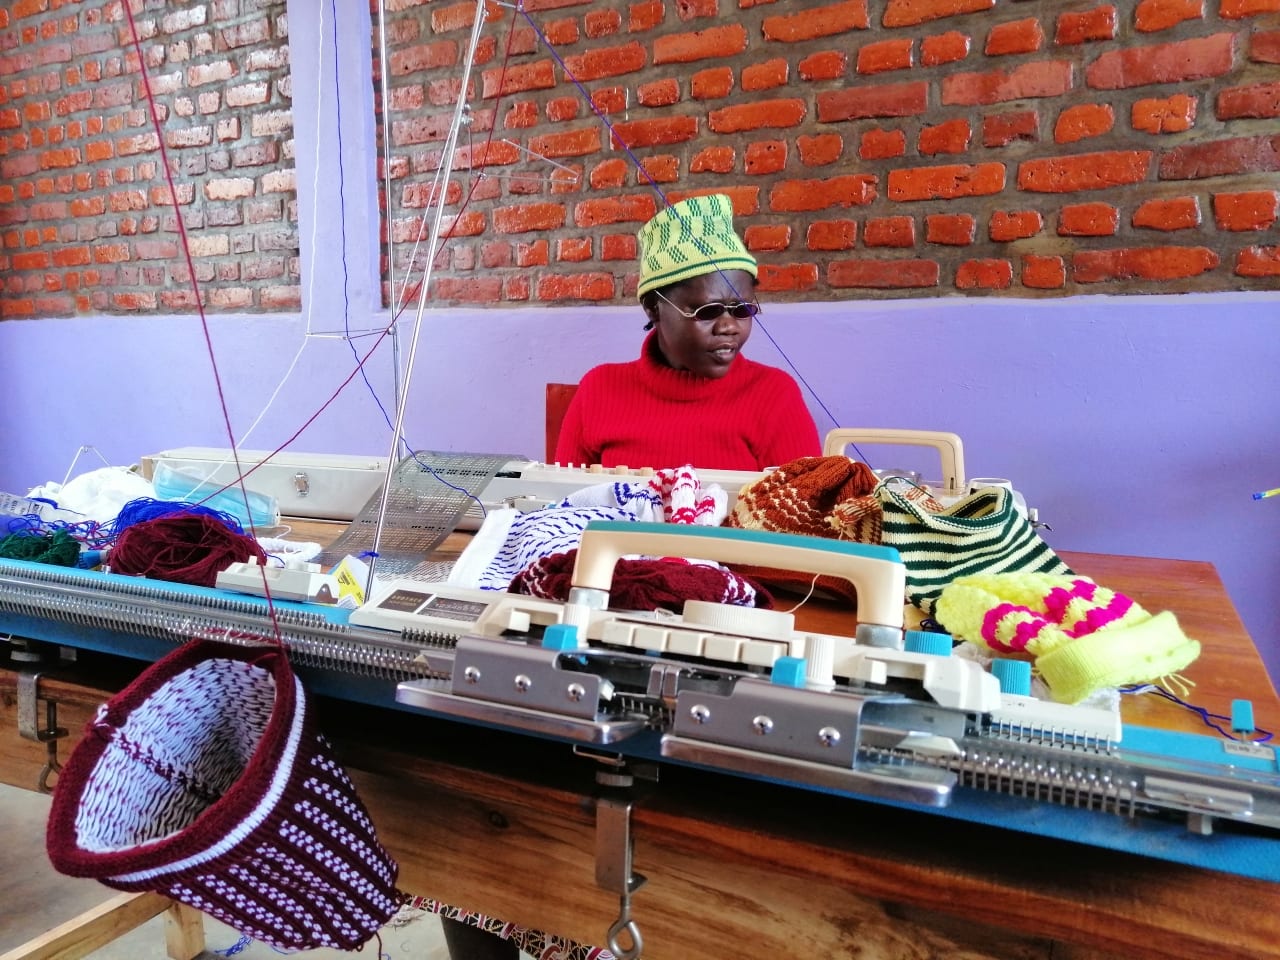 Rwanda Action: Godberita-leads-the-knitting-group-even-though-she-is-blind